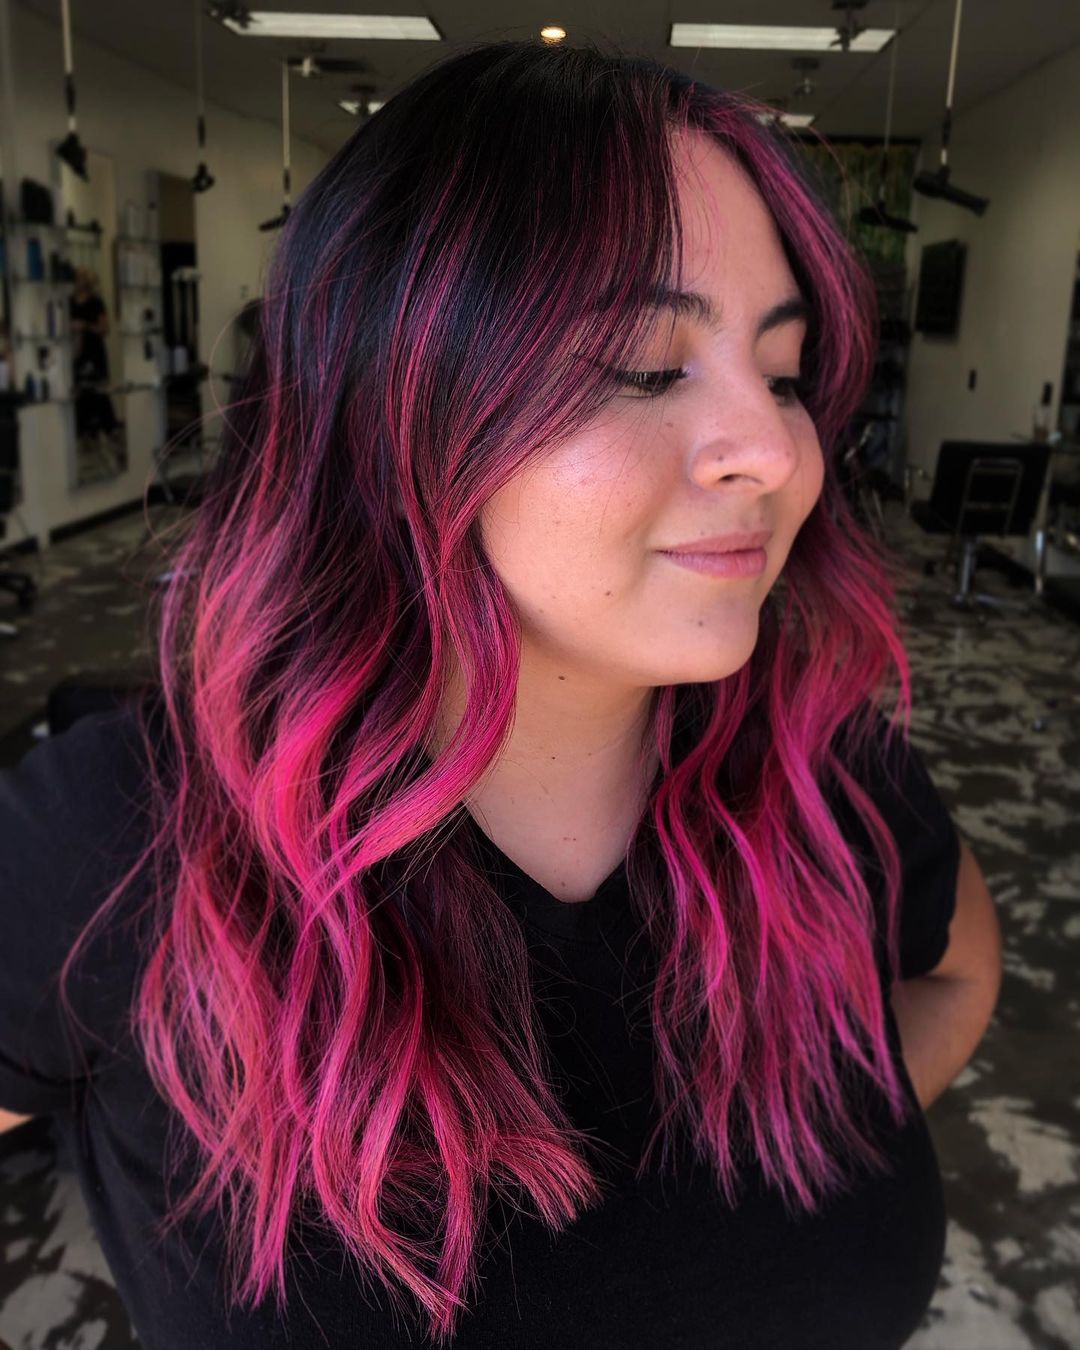 Black Hair with Bold Pink Highlights